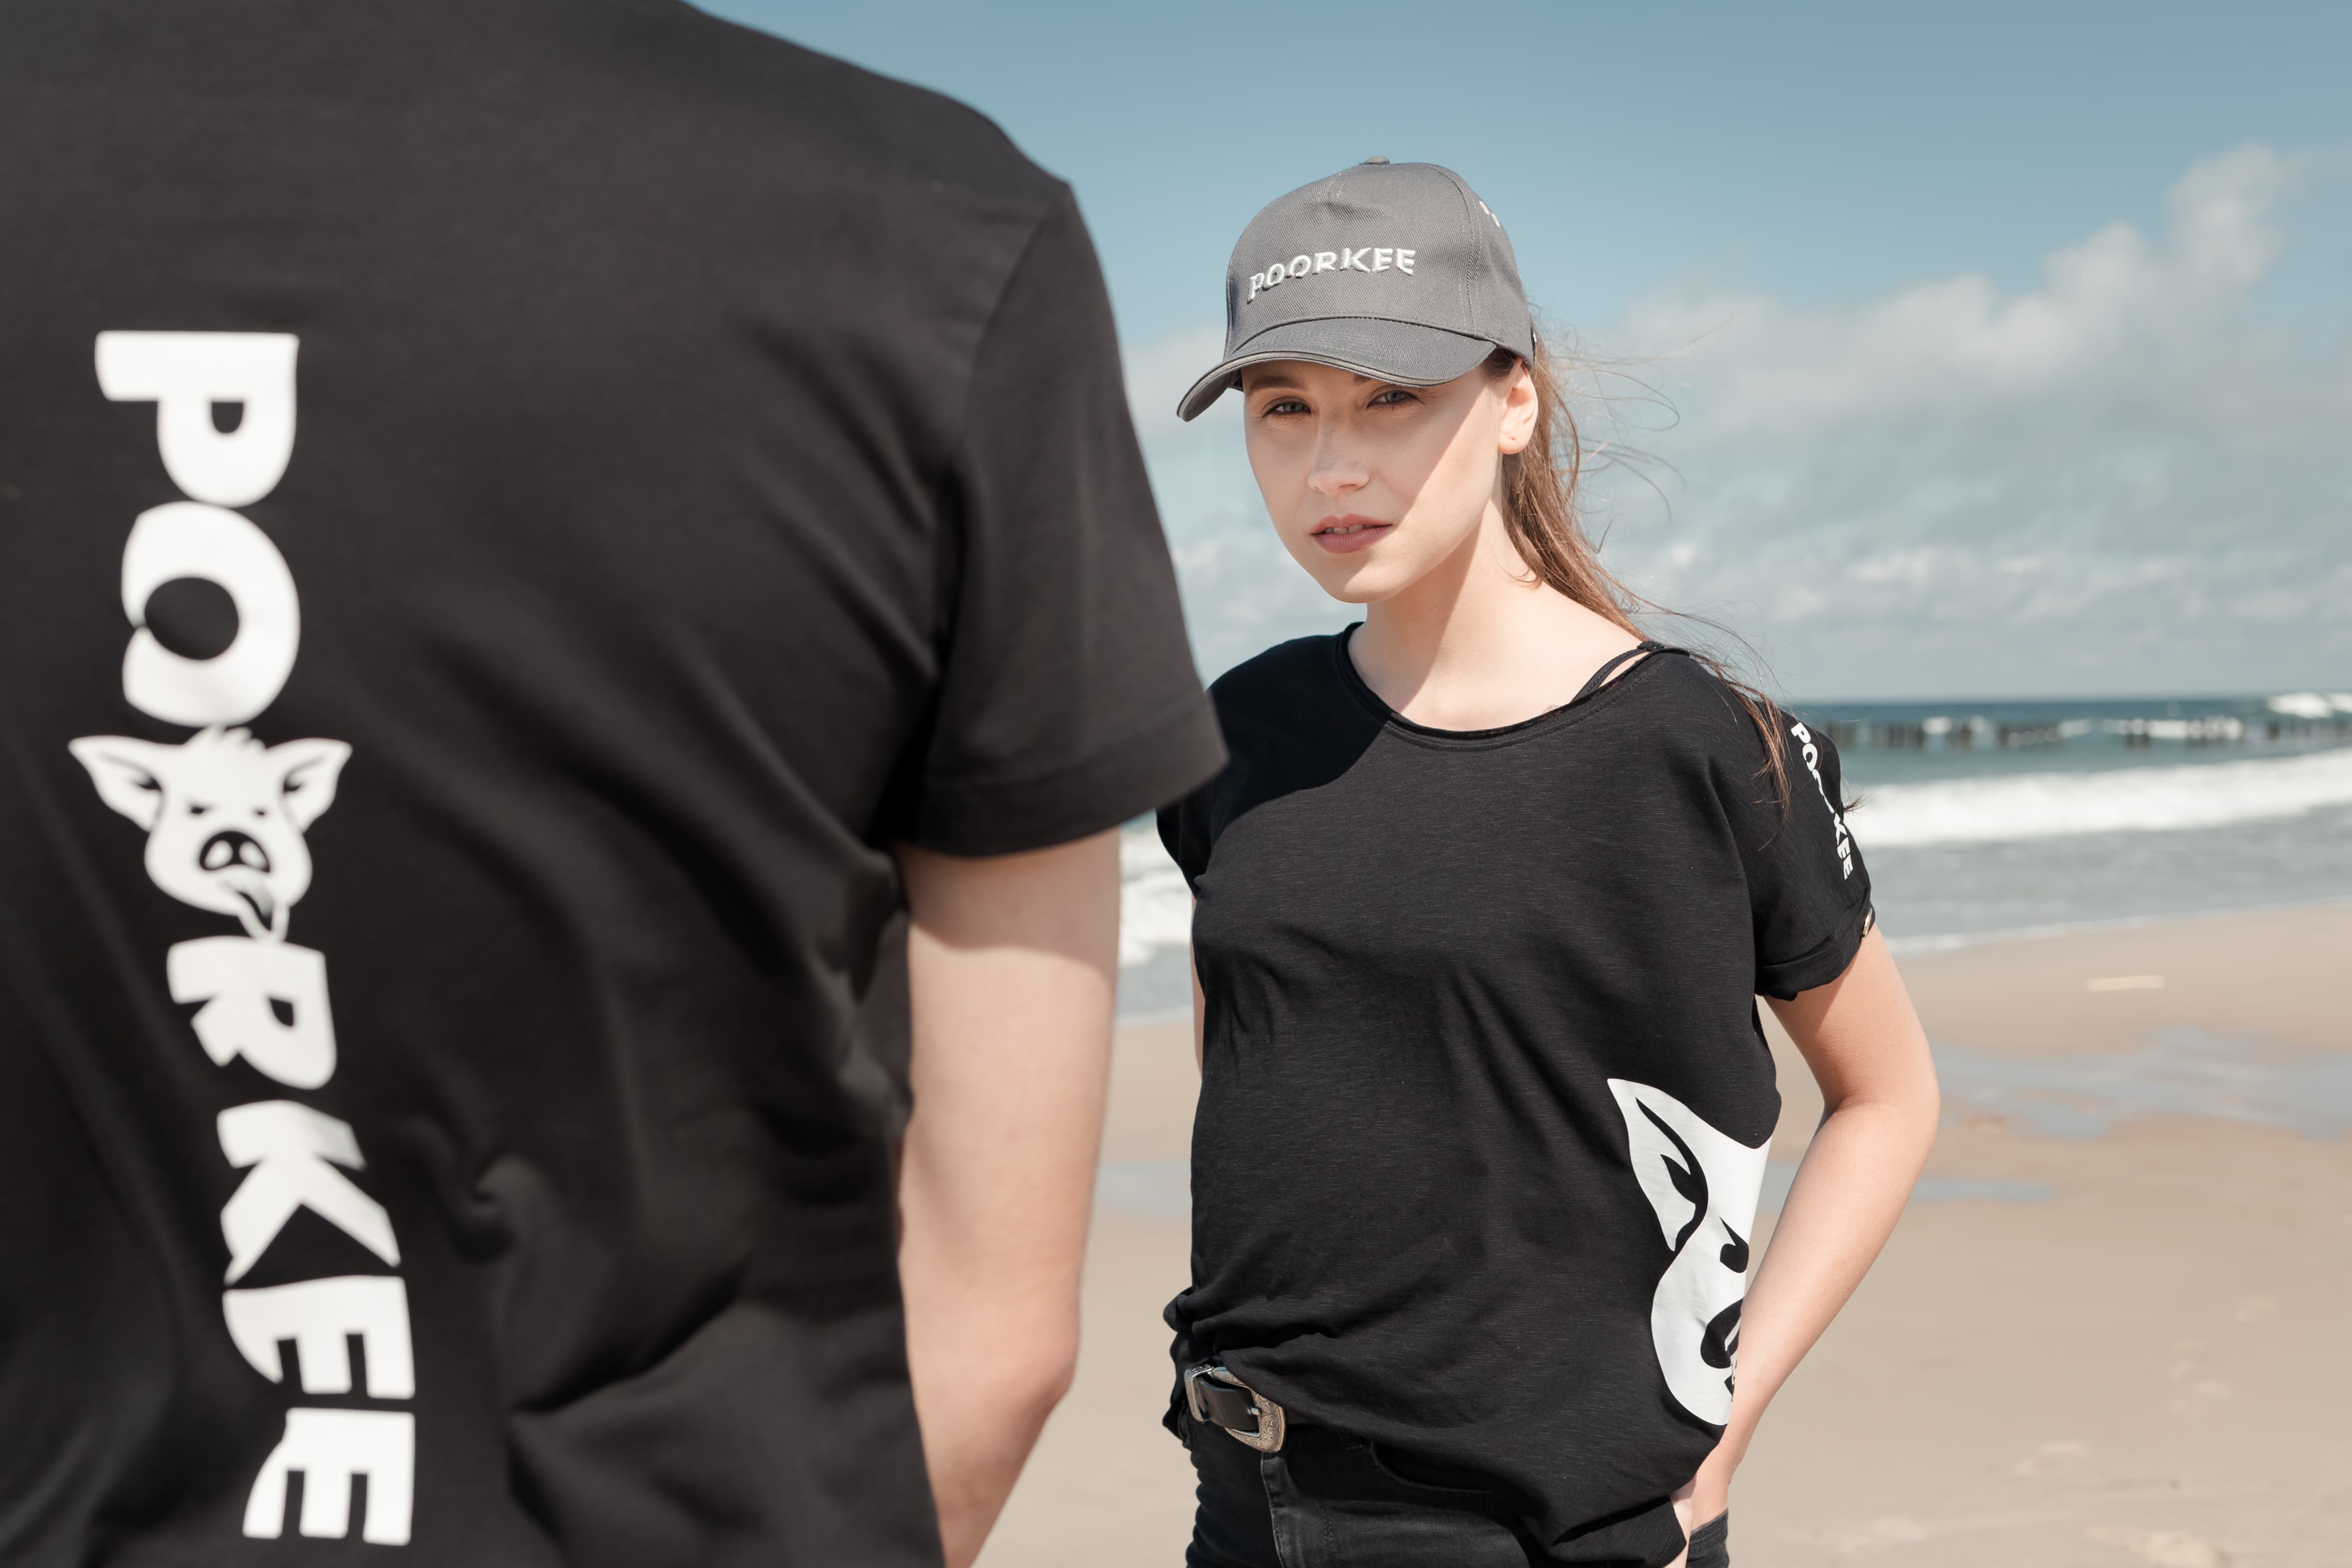 a girl in a black T-shirt and a gray baseball cap on the beach looks at the camera